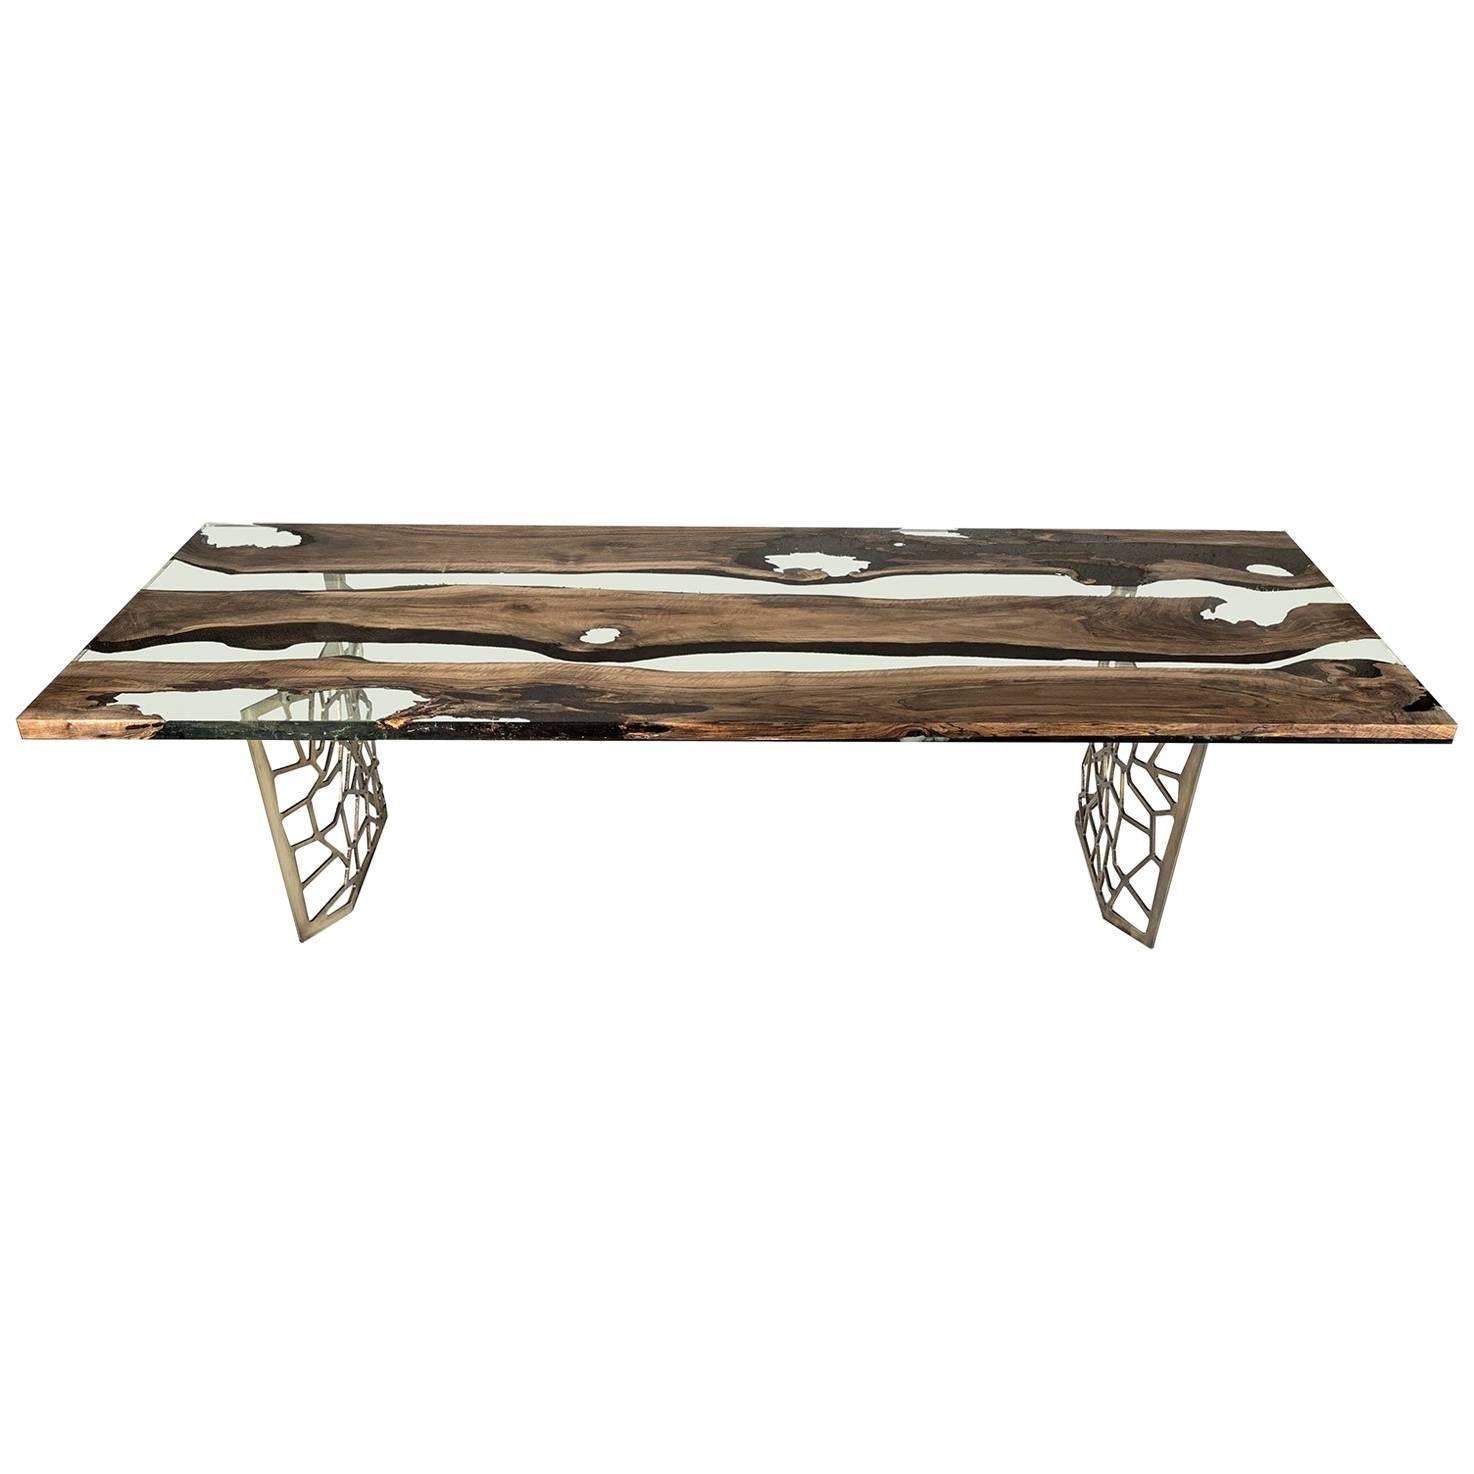 Hudson 270 Epoxy Resin Table For Sale